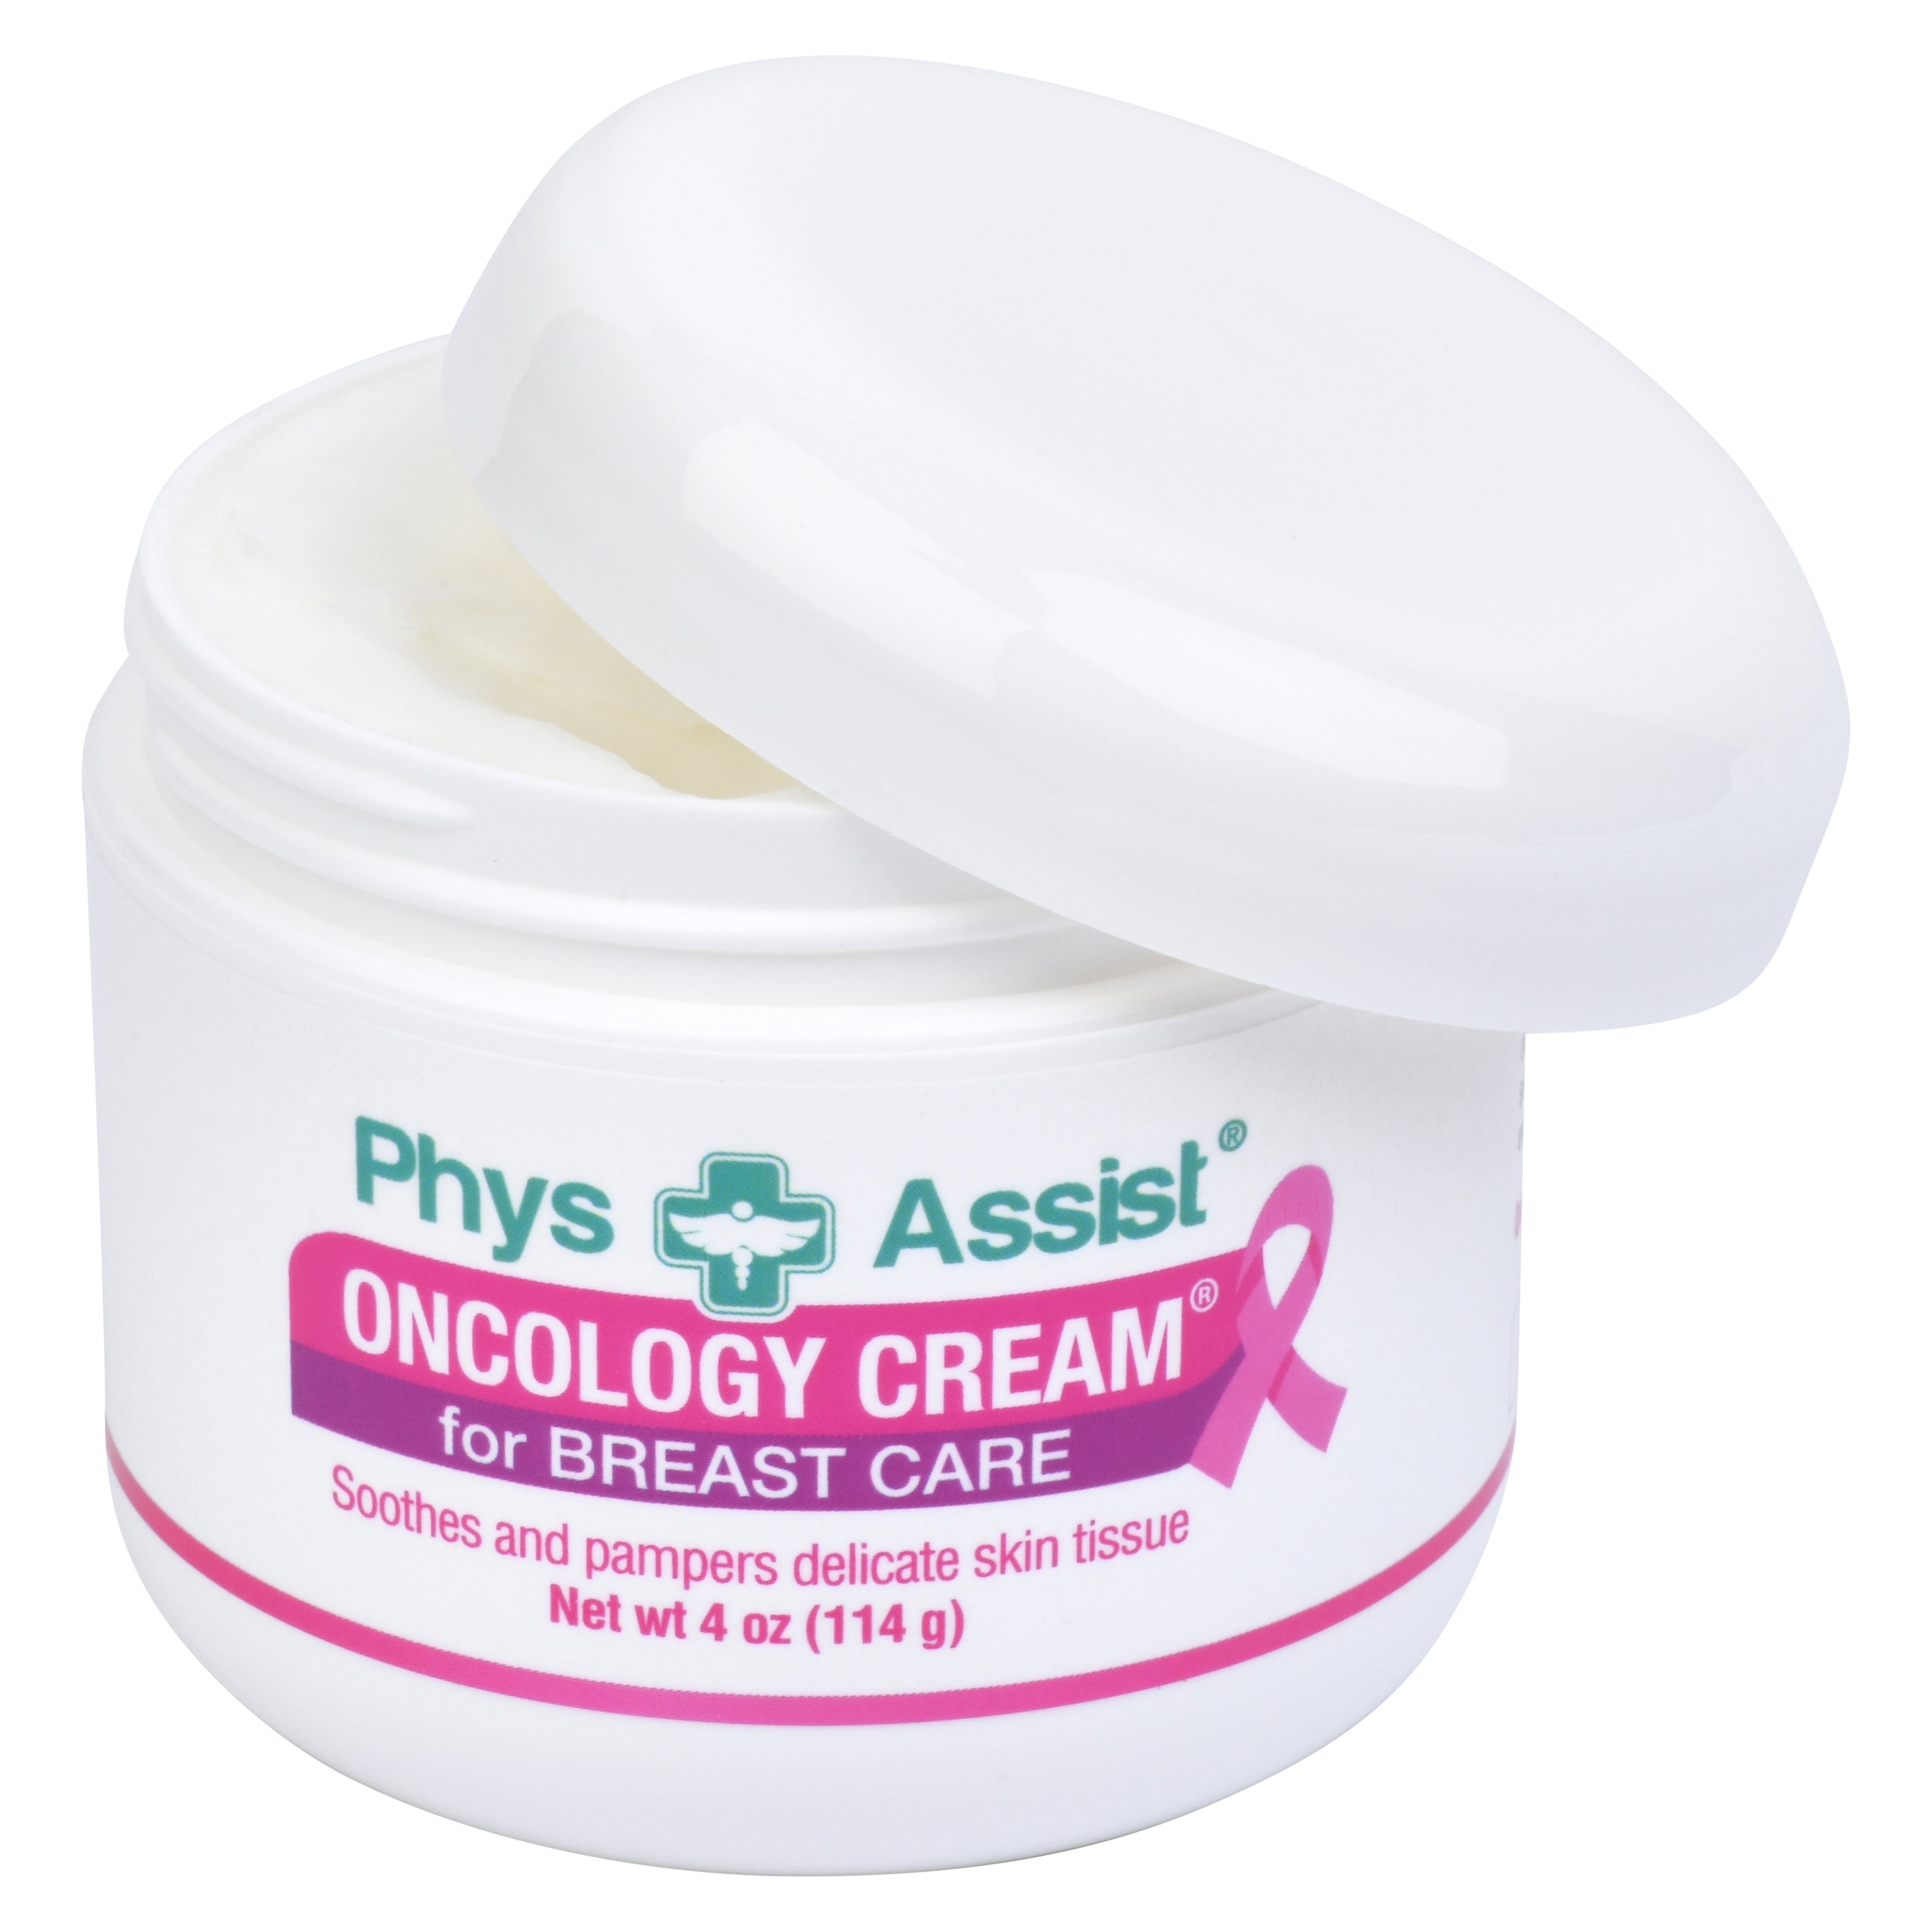 Oncology Cream for Breast Care